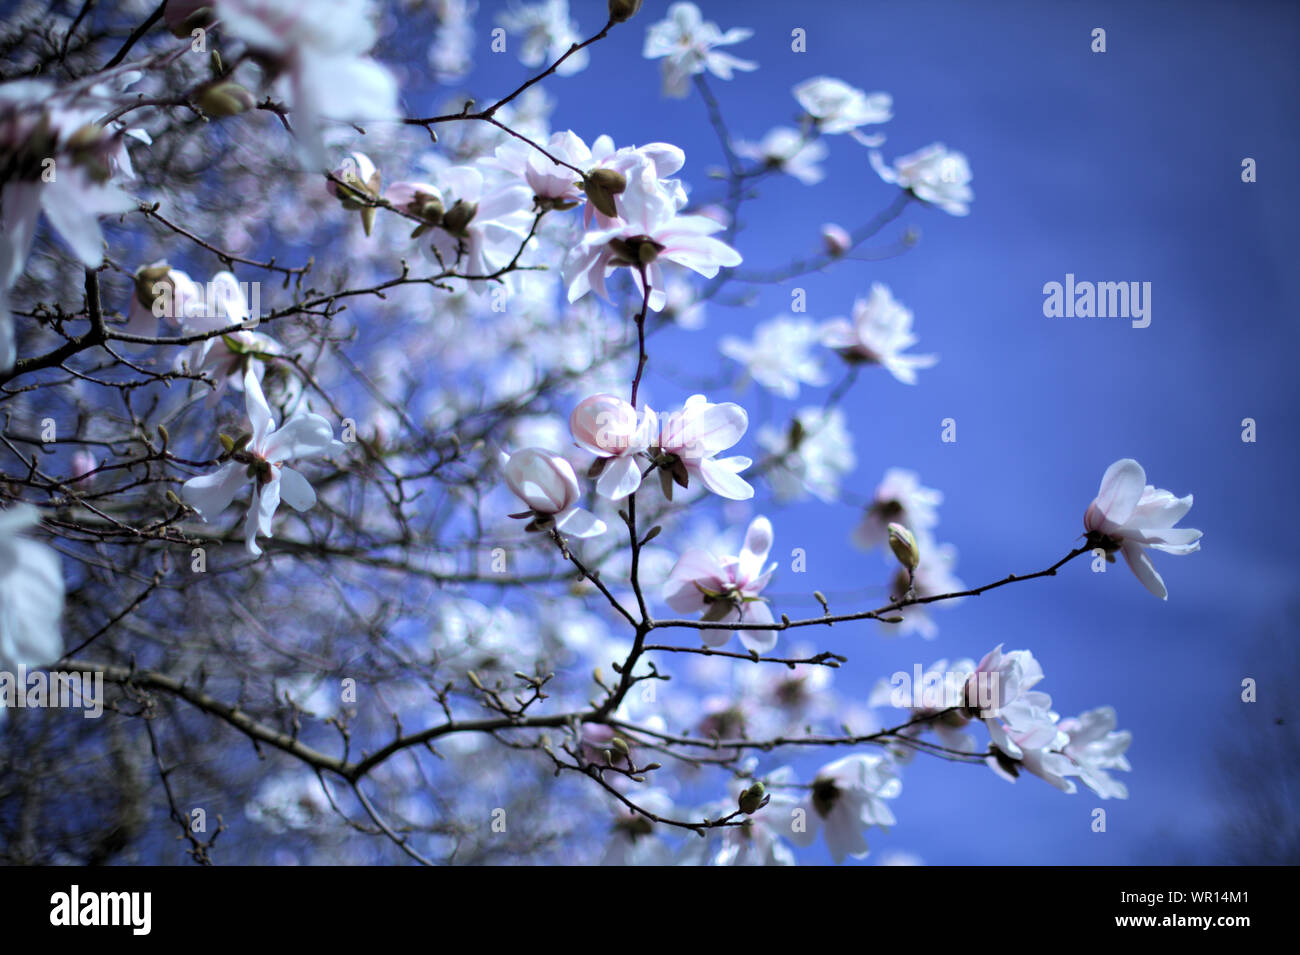 White magnolia flower branches in bloom with a blue sky background, in pale spring afternoon light, in Wilsonville, Oregon, USA Stock Photo